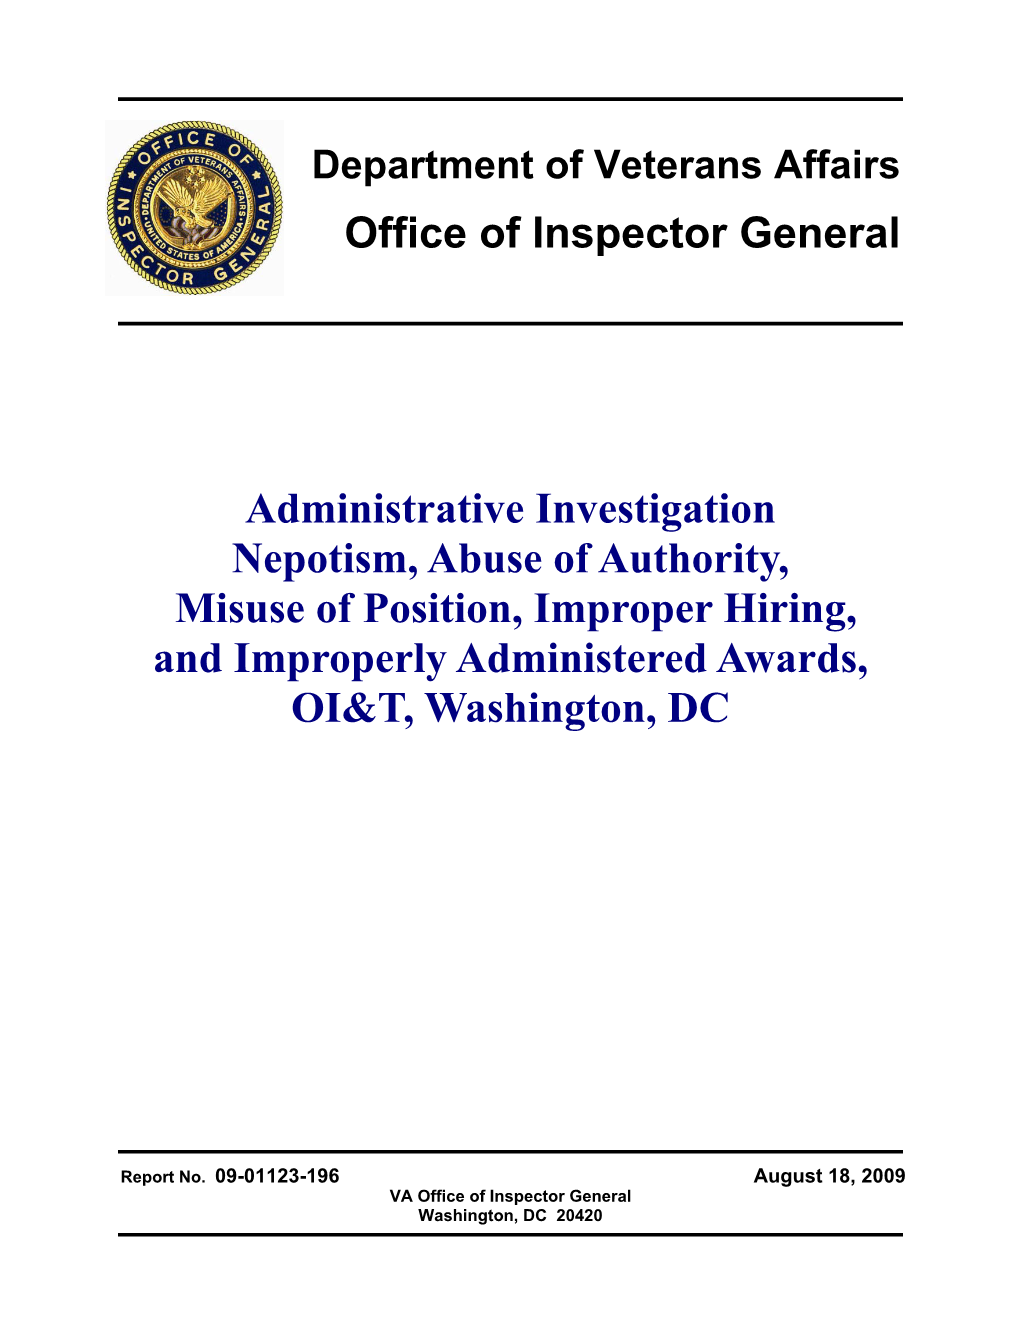 Administrative Investigation Nepotism, Abuse of Authority, Misuse of Position, Improper Hiring, and Improperly Administered Awards, OI&T, Washington, DC